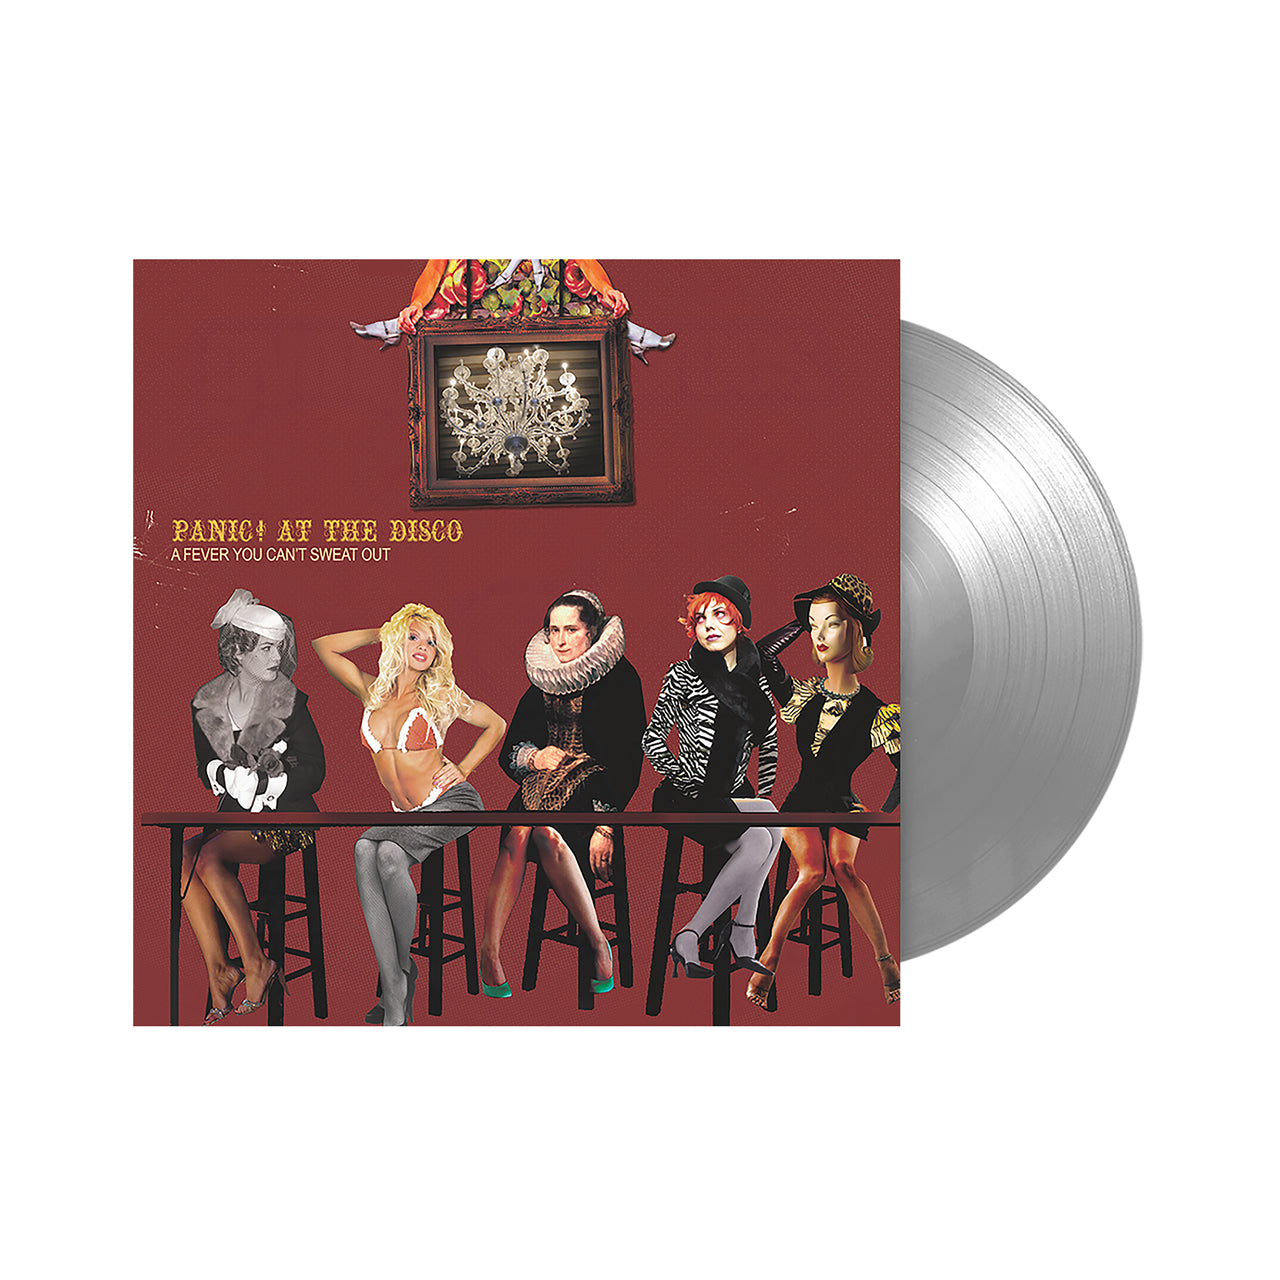 Buy Panic! At the Disco - Fever That You Can't Sweat Out (25th Anniversary Edition, Silver Vinyl)